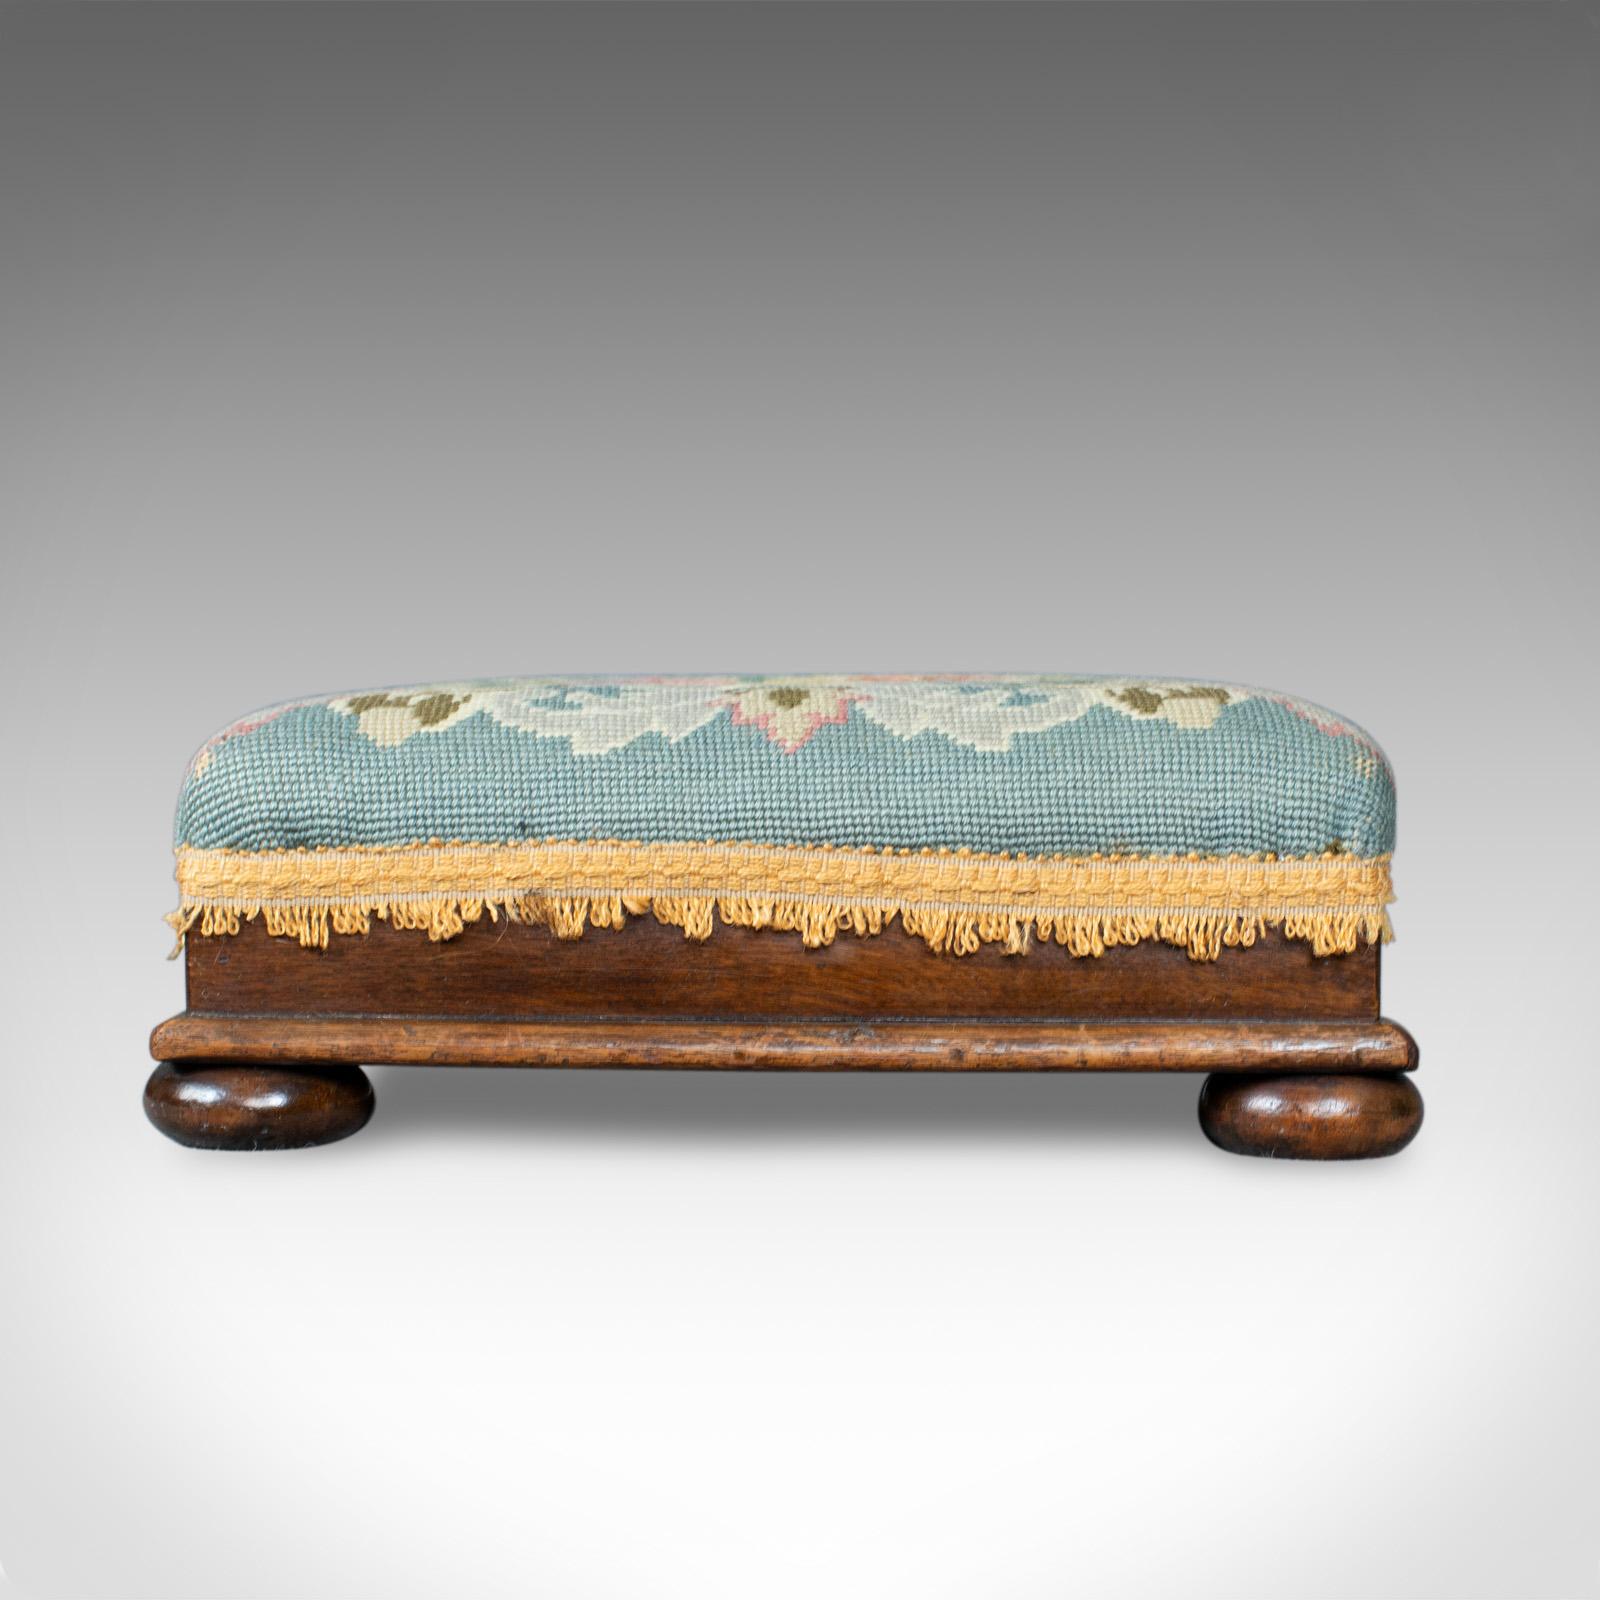 This is a square antique footstool. An English, Victorian, needlepoint, carriage footrest dating to the late 19th century, circa 1890.

Traditionally stuffed and finished in a needlepoint cloth
Some desirable wear to the floral pattern
Trimmed